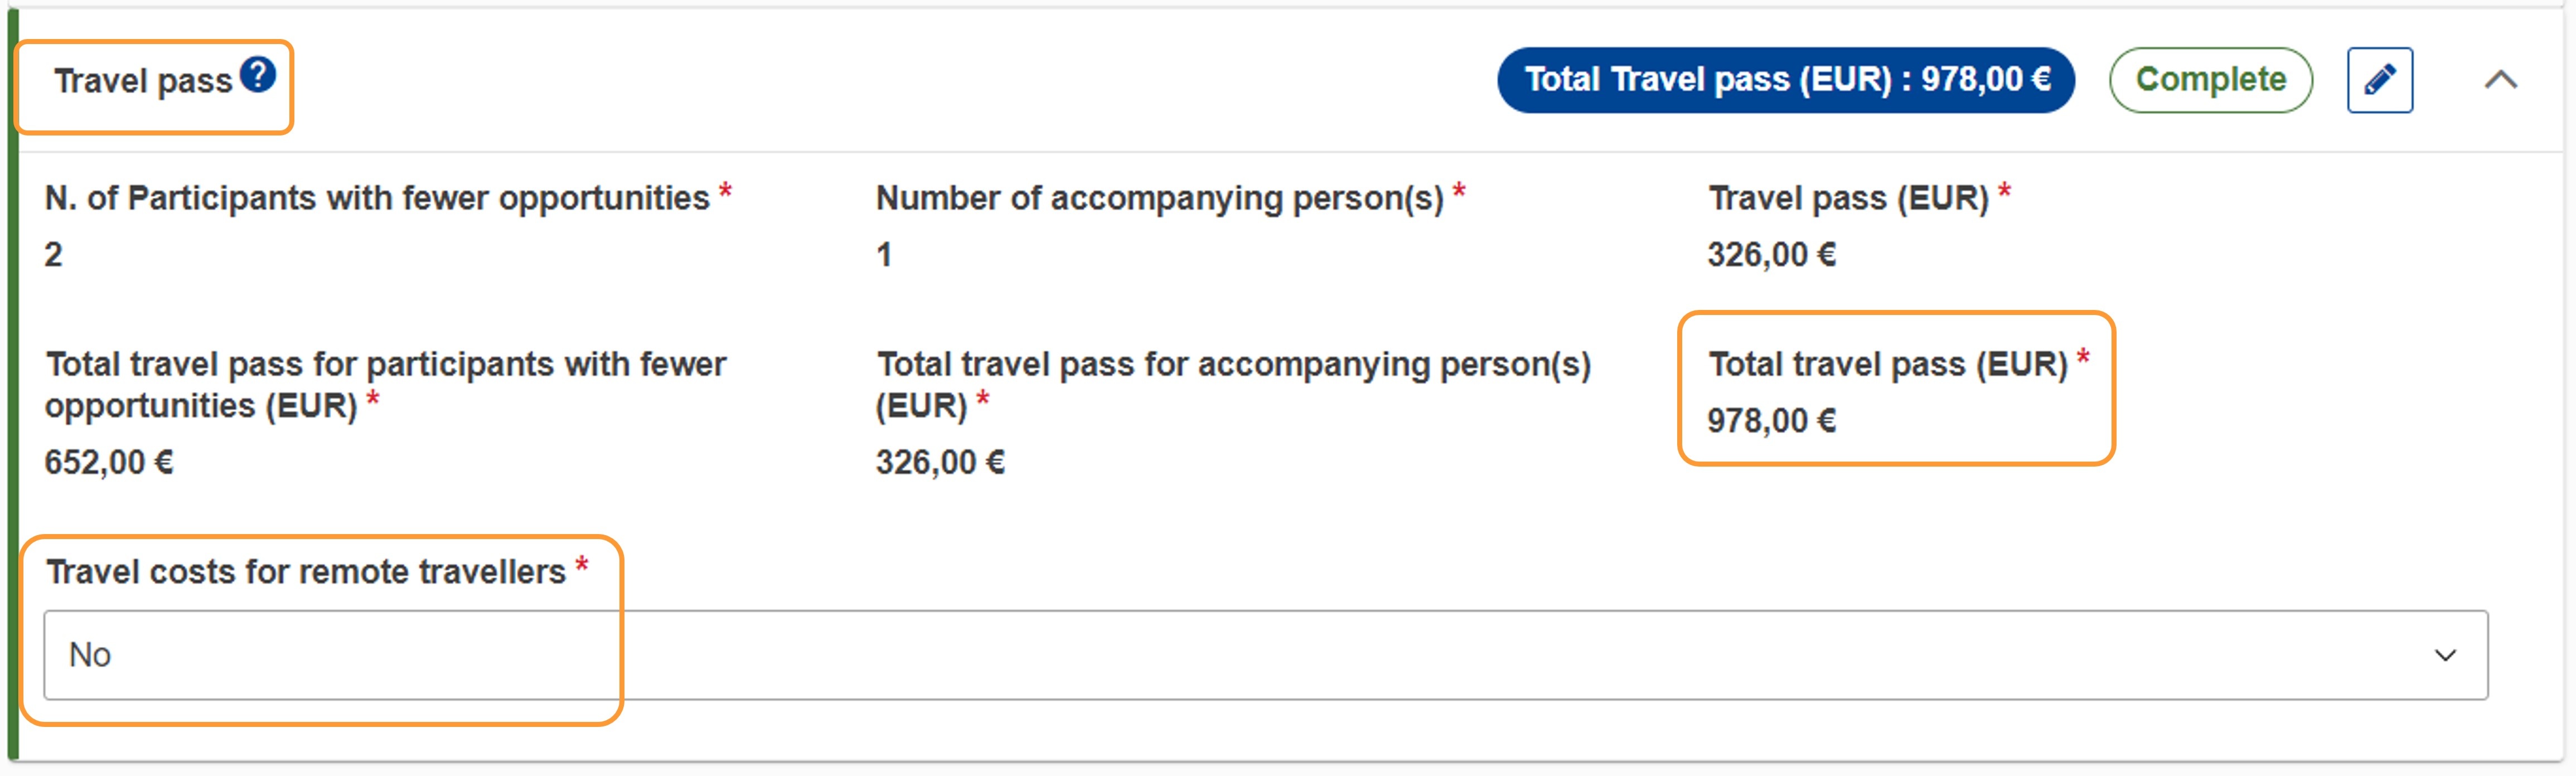 Travel pass costs